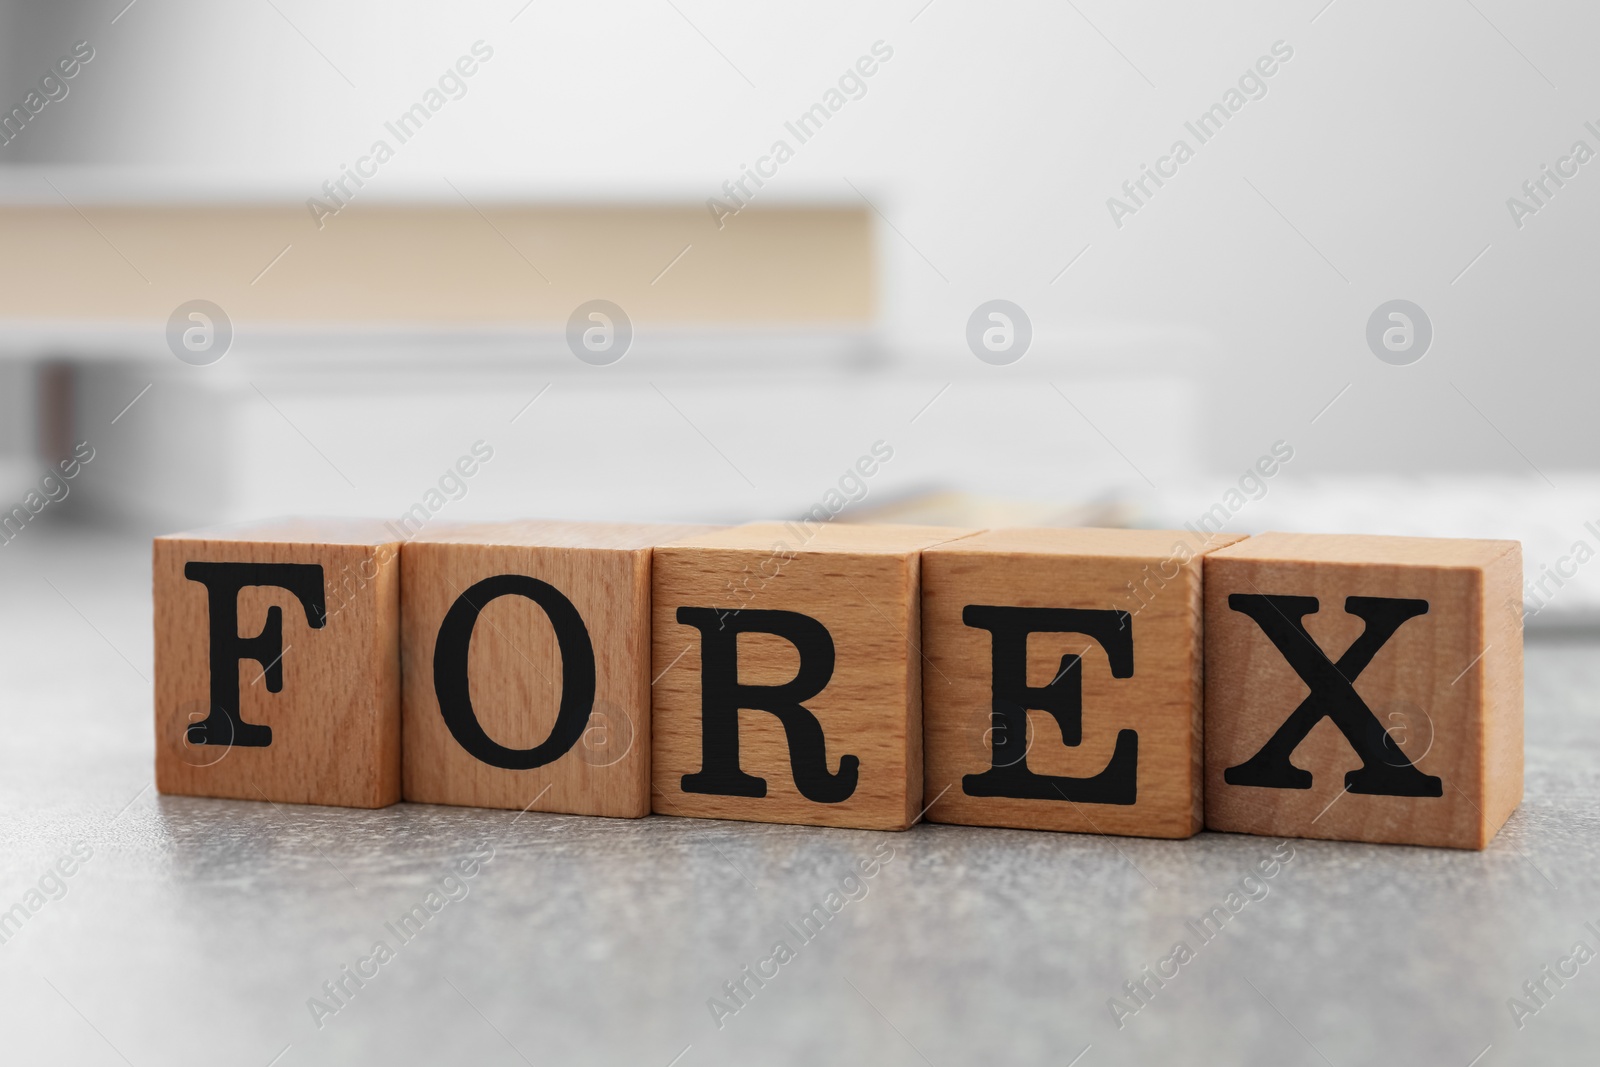 Photo of Word Forex made of wooden cubes with letters on grey table, closeup